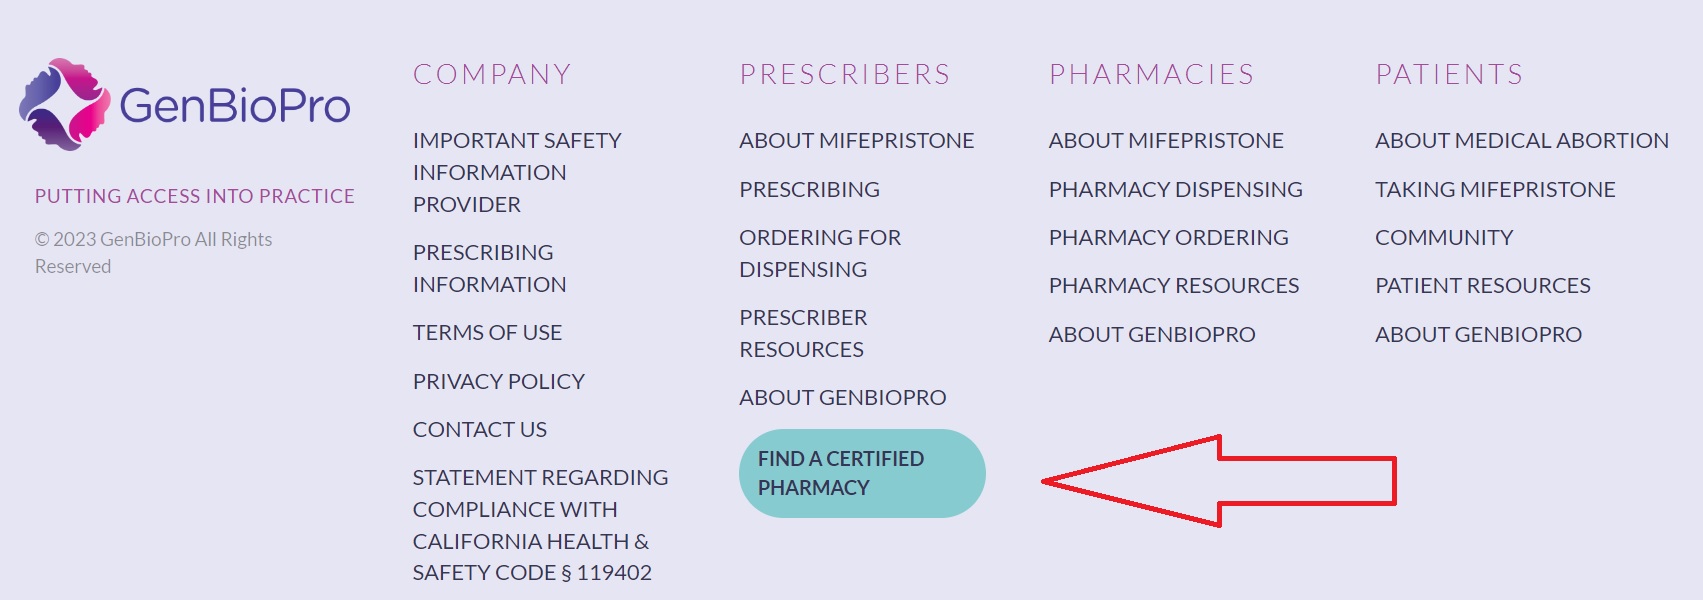 GenBioPro website certified pharmacy for abortion pill